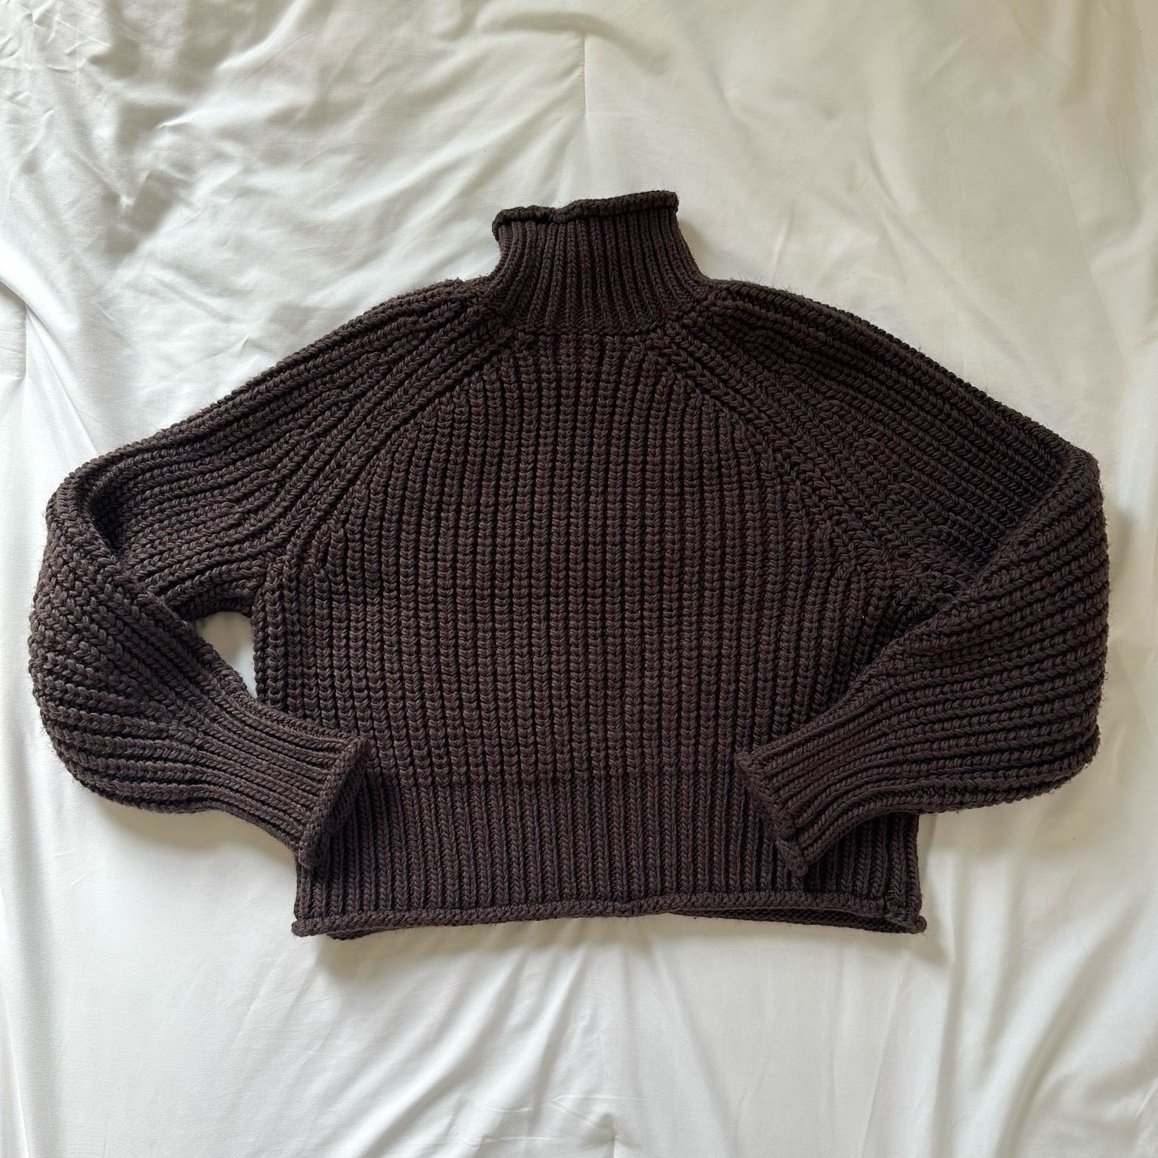 Exclusive H&M Brown Turtleneck Knit Sweater Size Medium fgE299DNN US Outlet